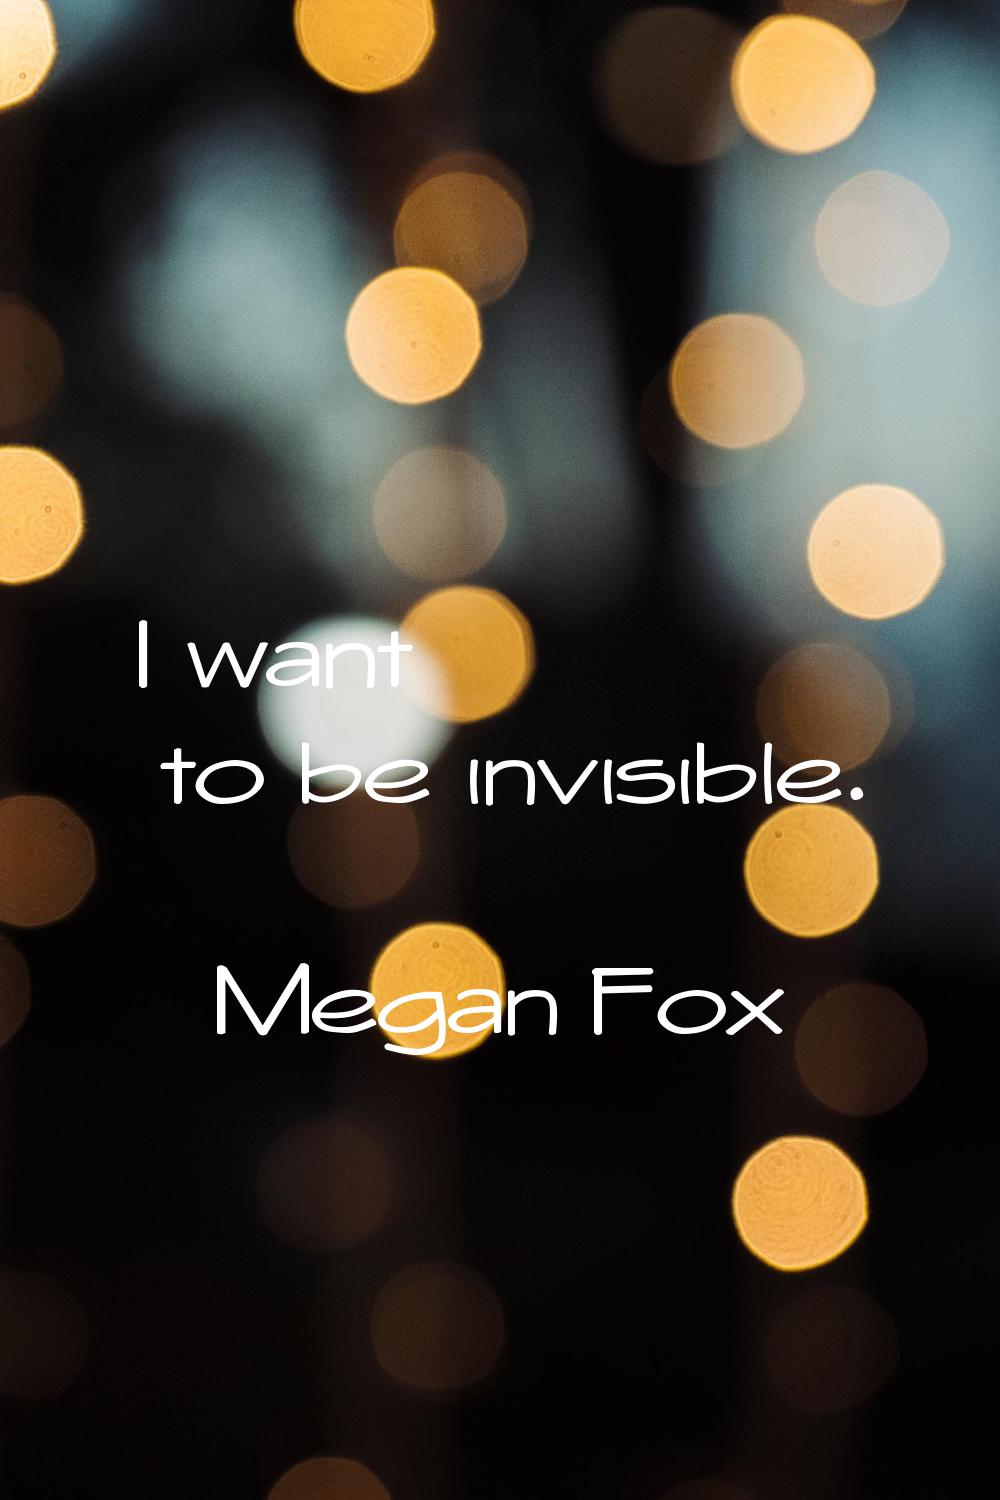 I want to be invisible.